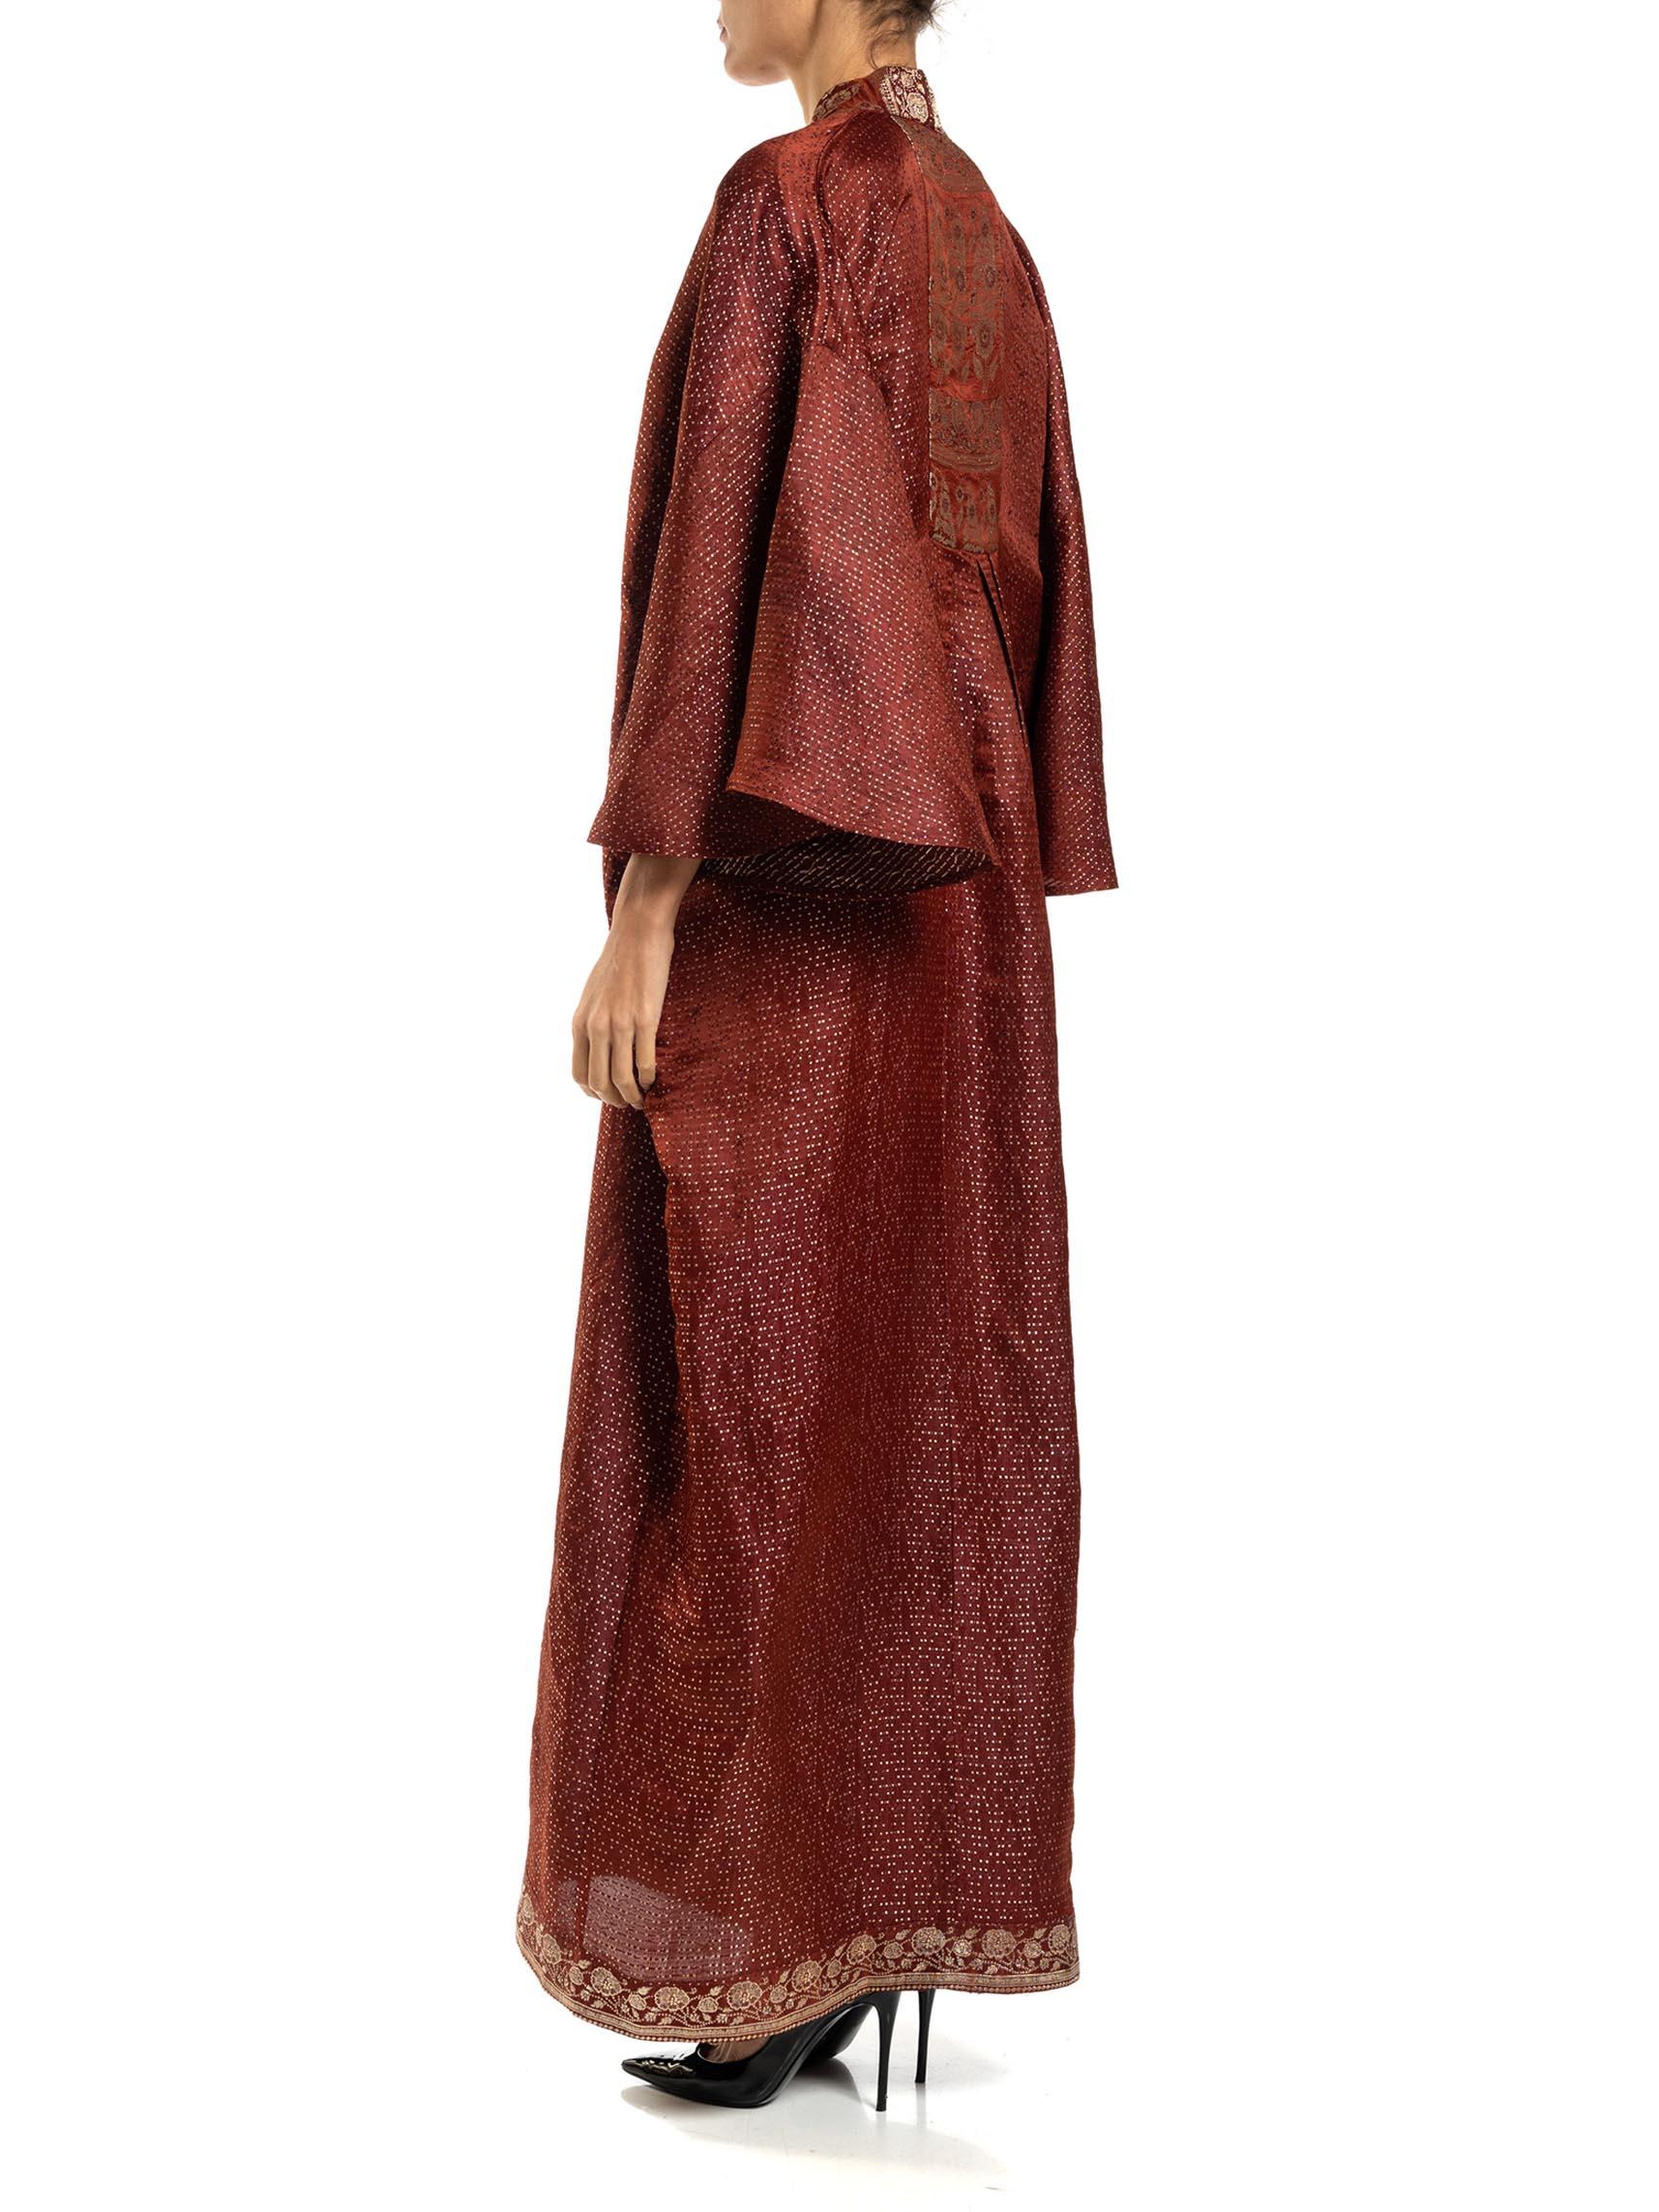 MORPHEW COLLECTION Burgundy Floral Silk Checkered Kaftan Made From Vintage Sari For Sale 2